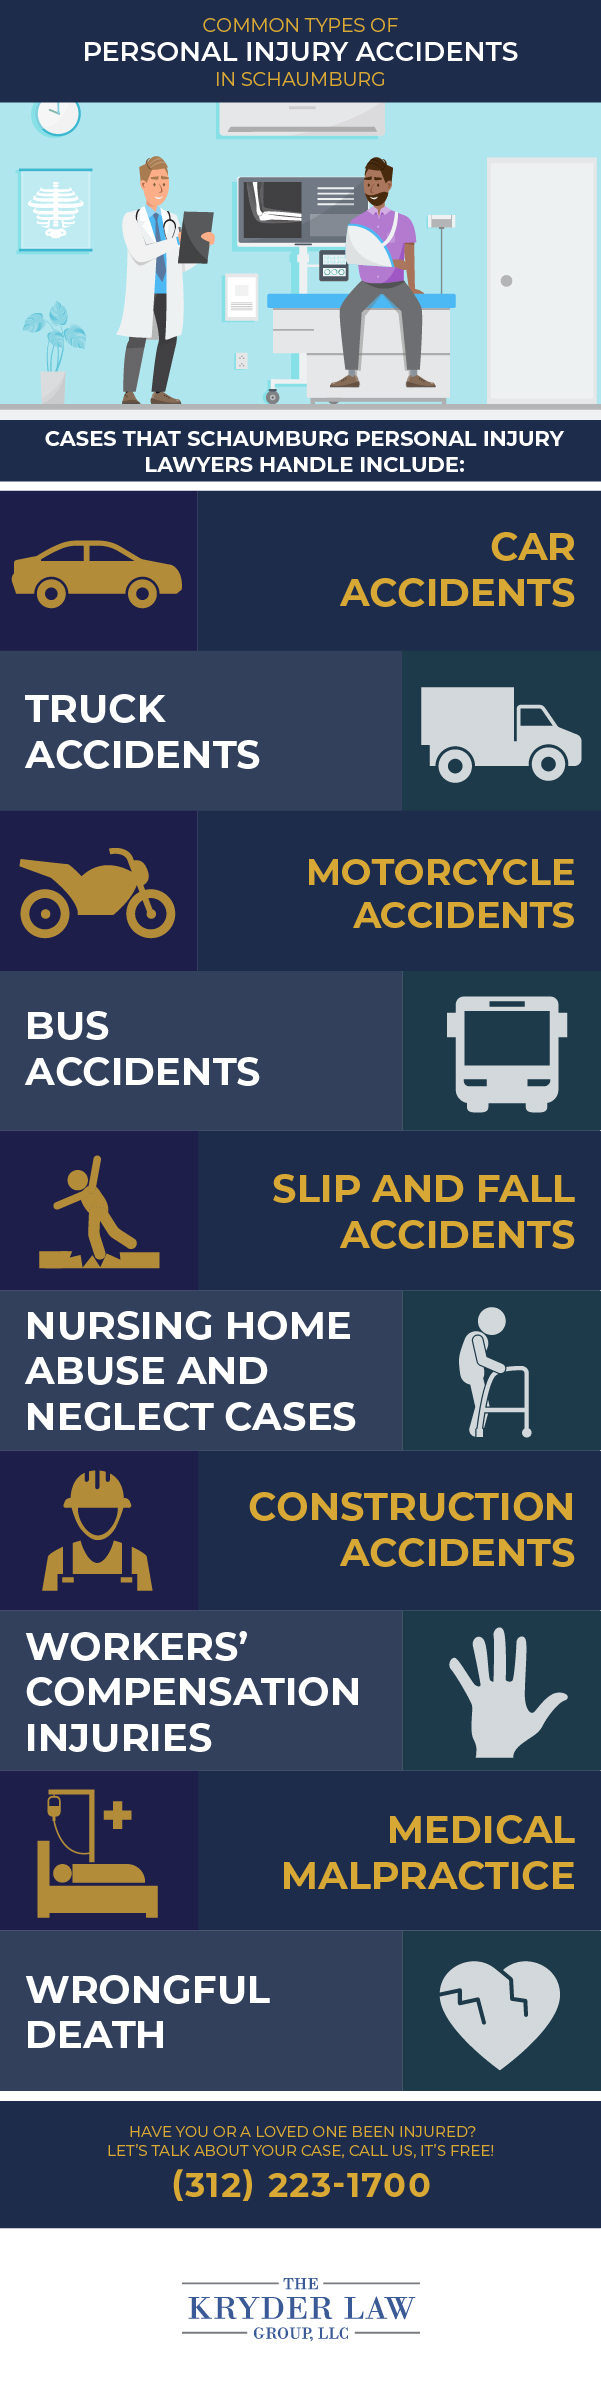 Common Types of Personal Injury Accidents in Schaumburg